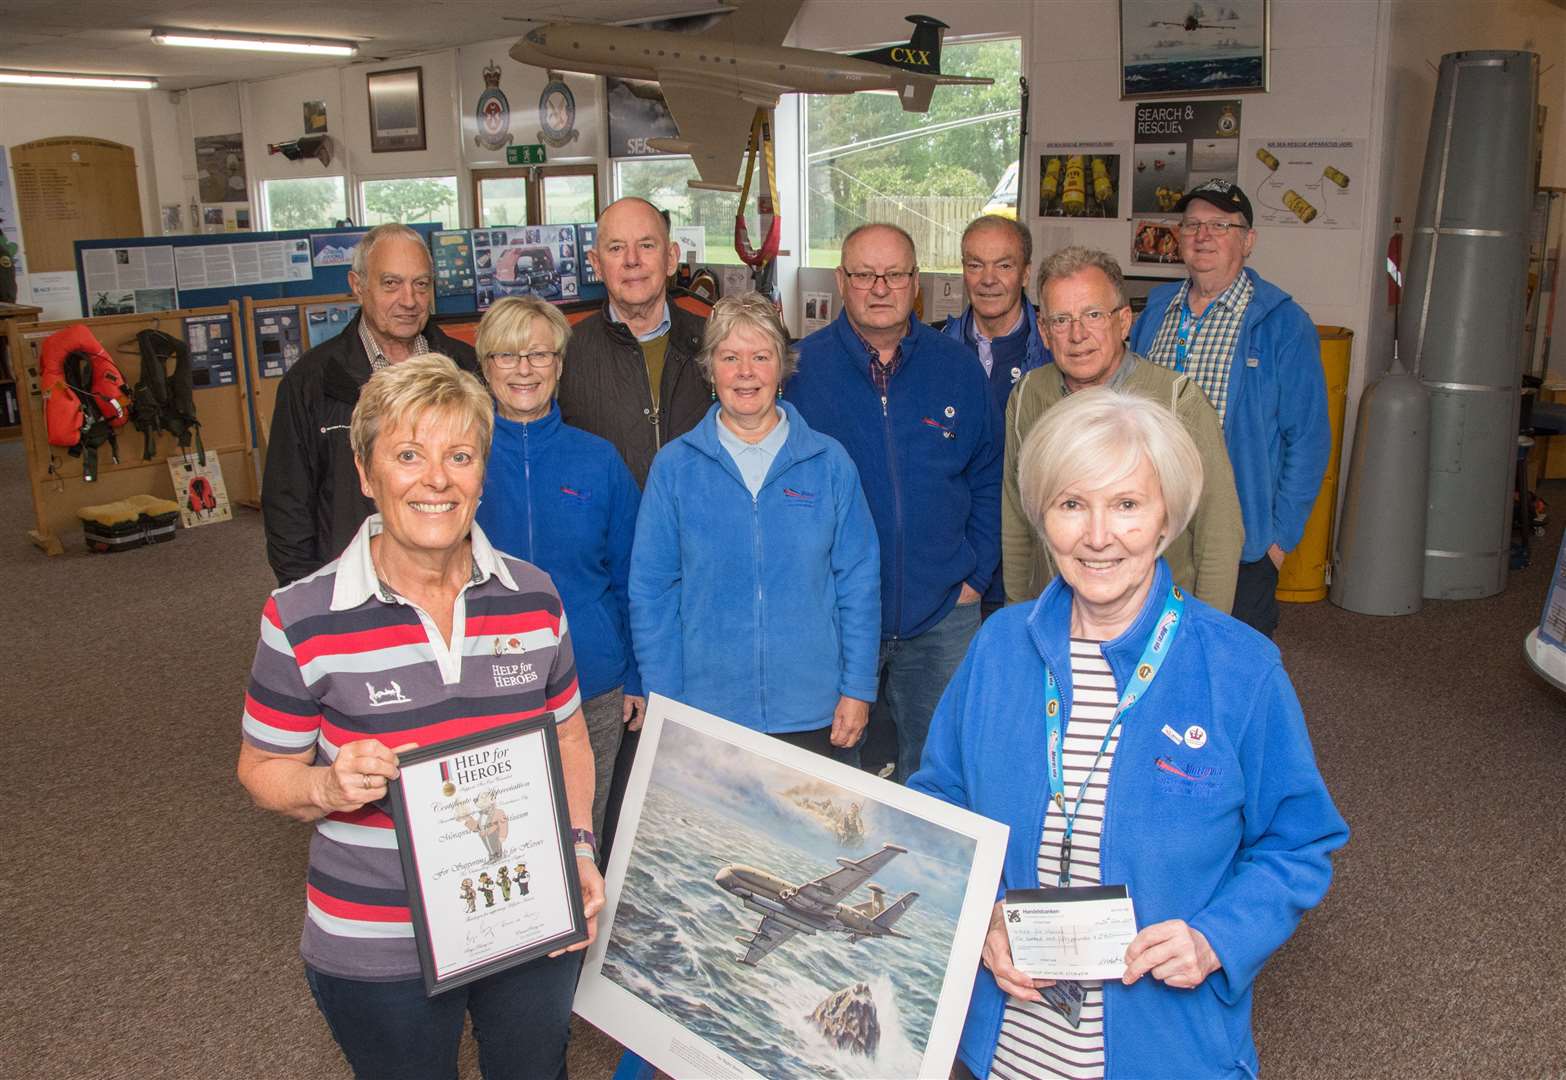 Lynne Herbert from Morayvia hands over a cheque for £250 this week to Dianne McLeish of Help for Heroes. The money was raised from the sale of the Nimrod print in the foreground. Picture: Becky Saunderson. Image No.044268.